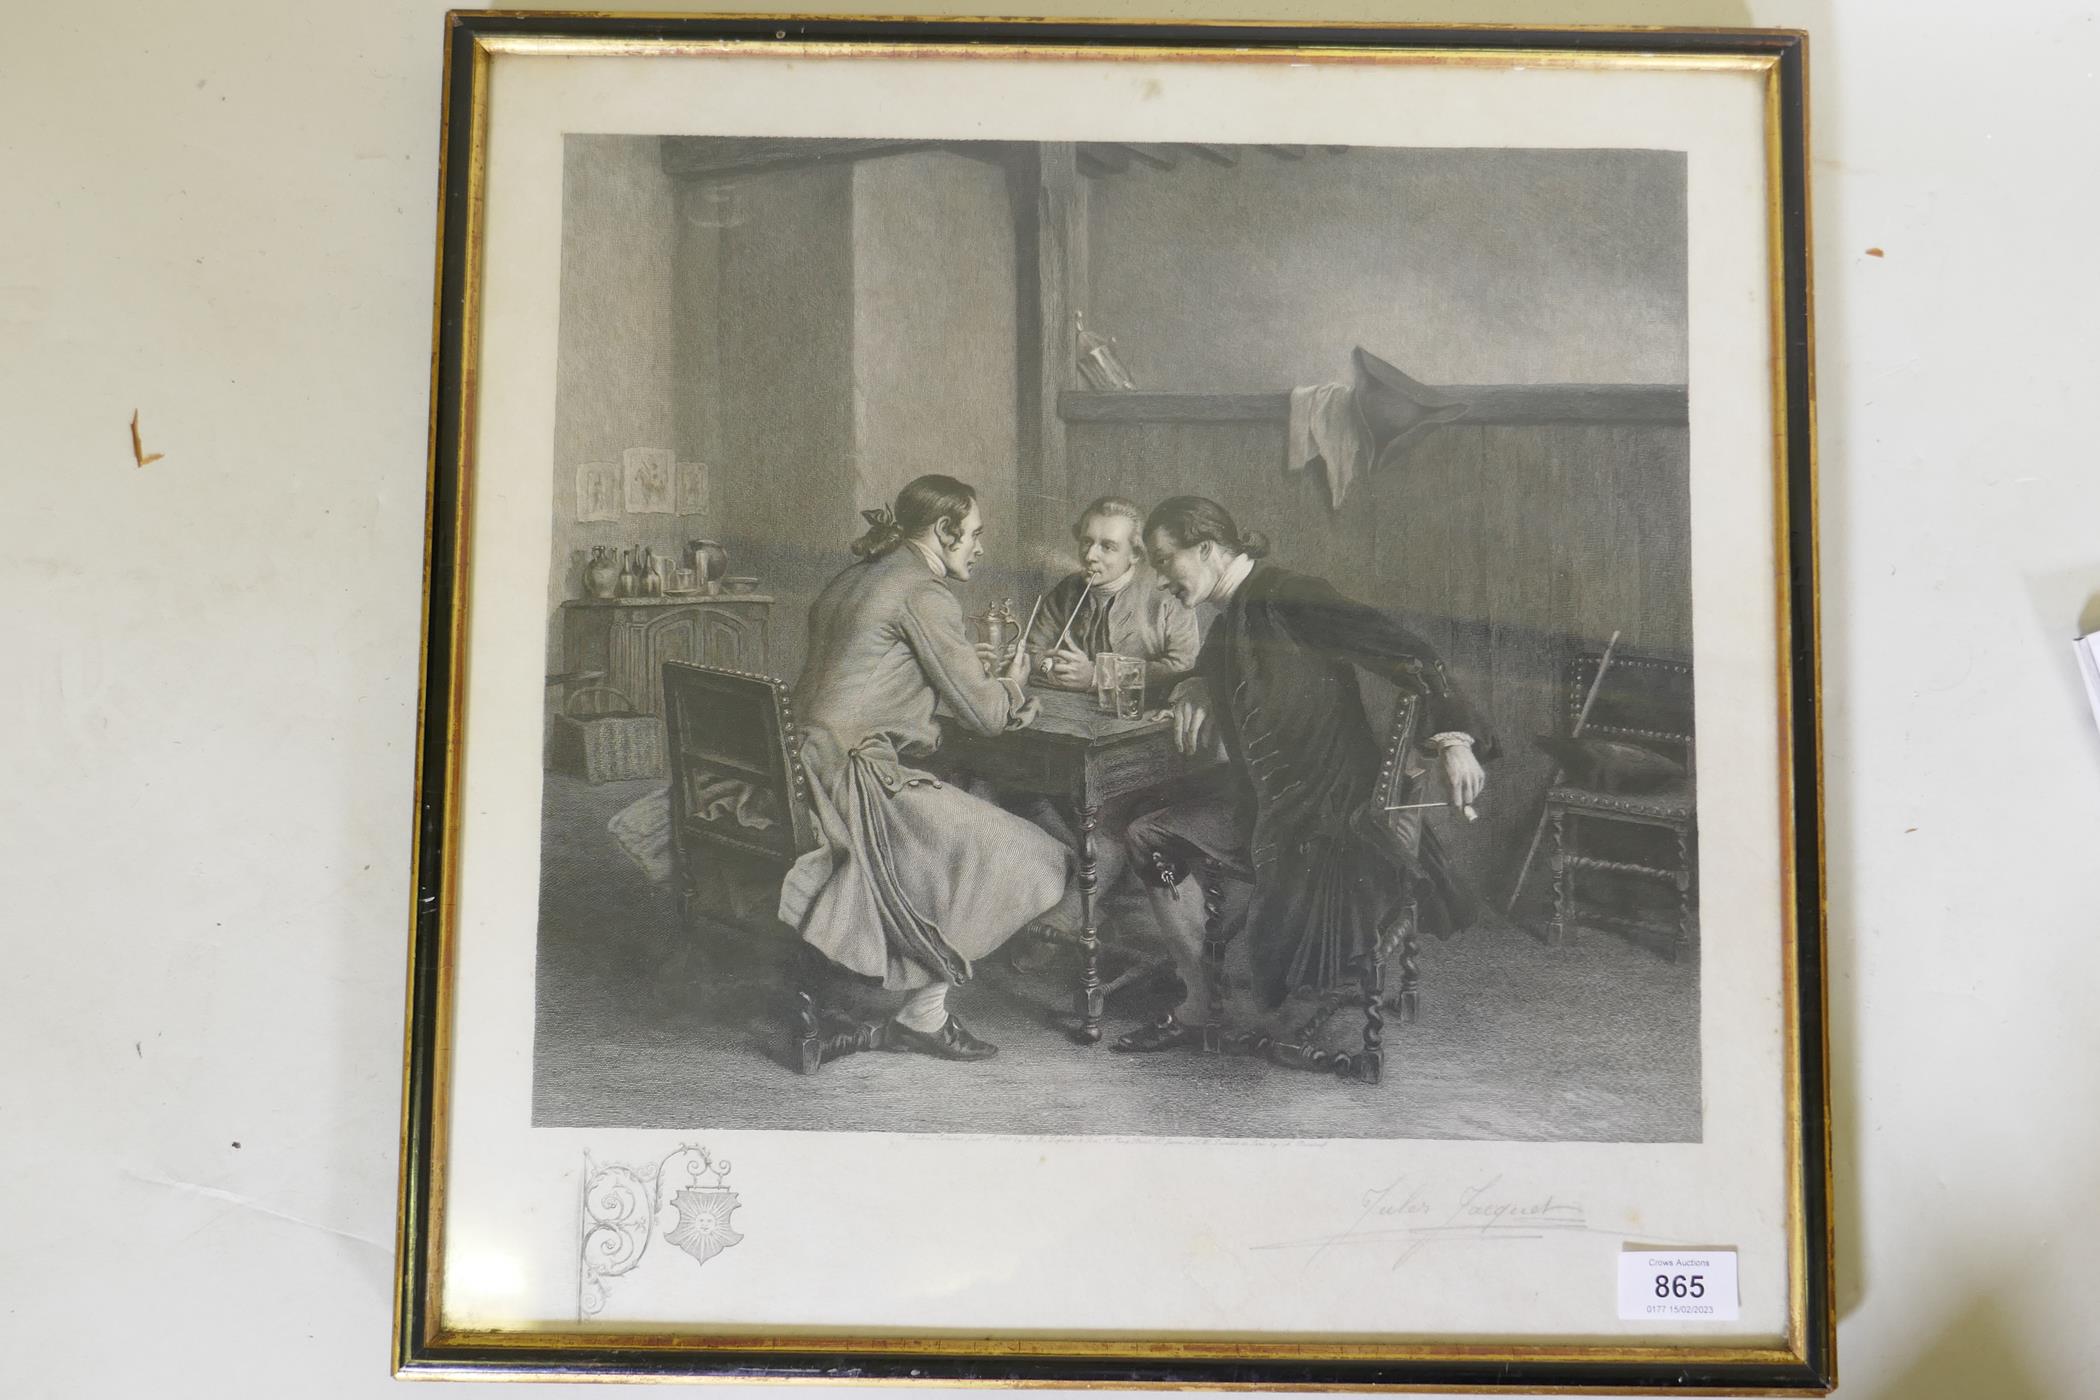 Jules Jacquet, three men in a tavern, engraving, signed, published 1900 London by L.H. Lefevre, - Image 2 of 4